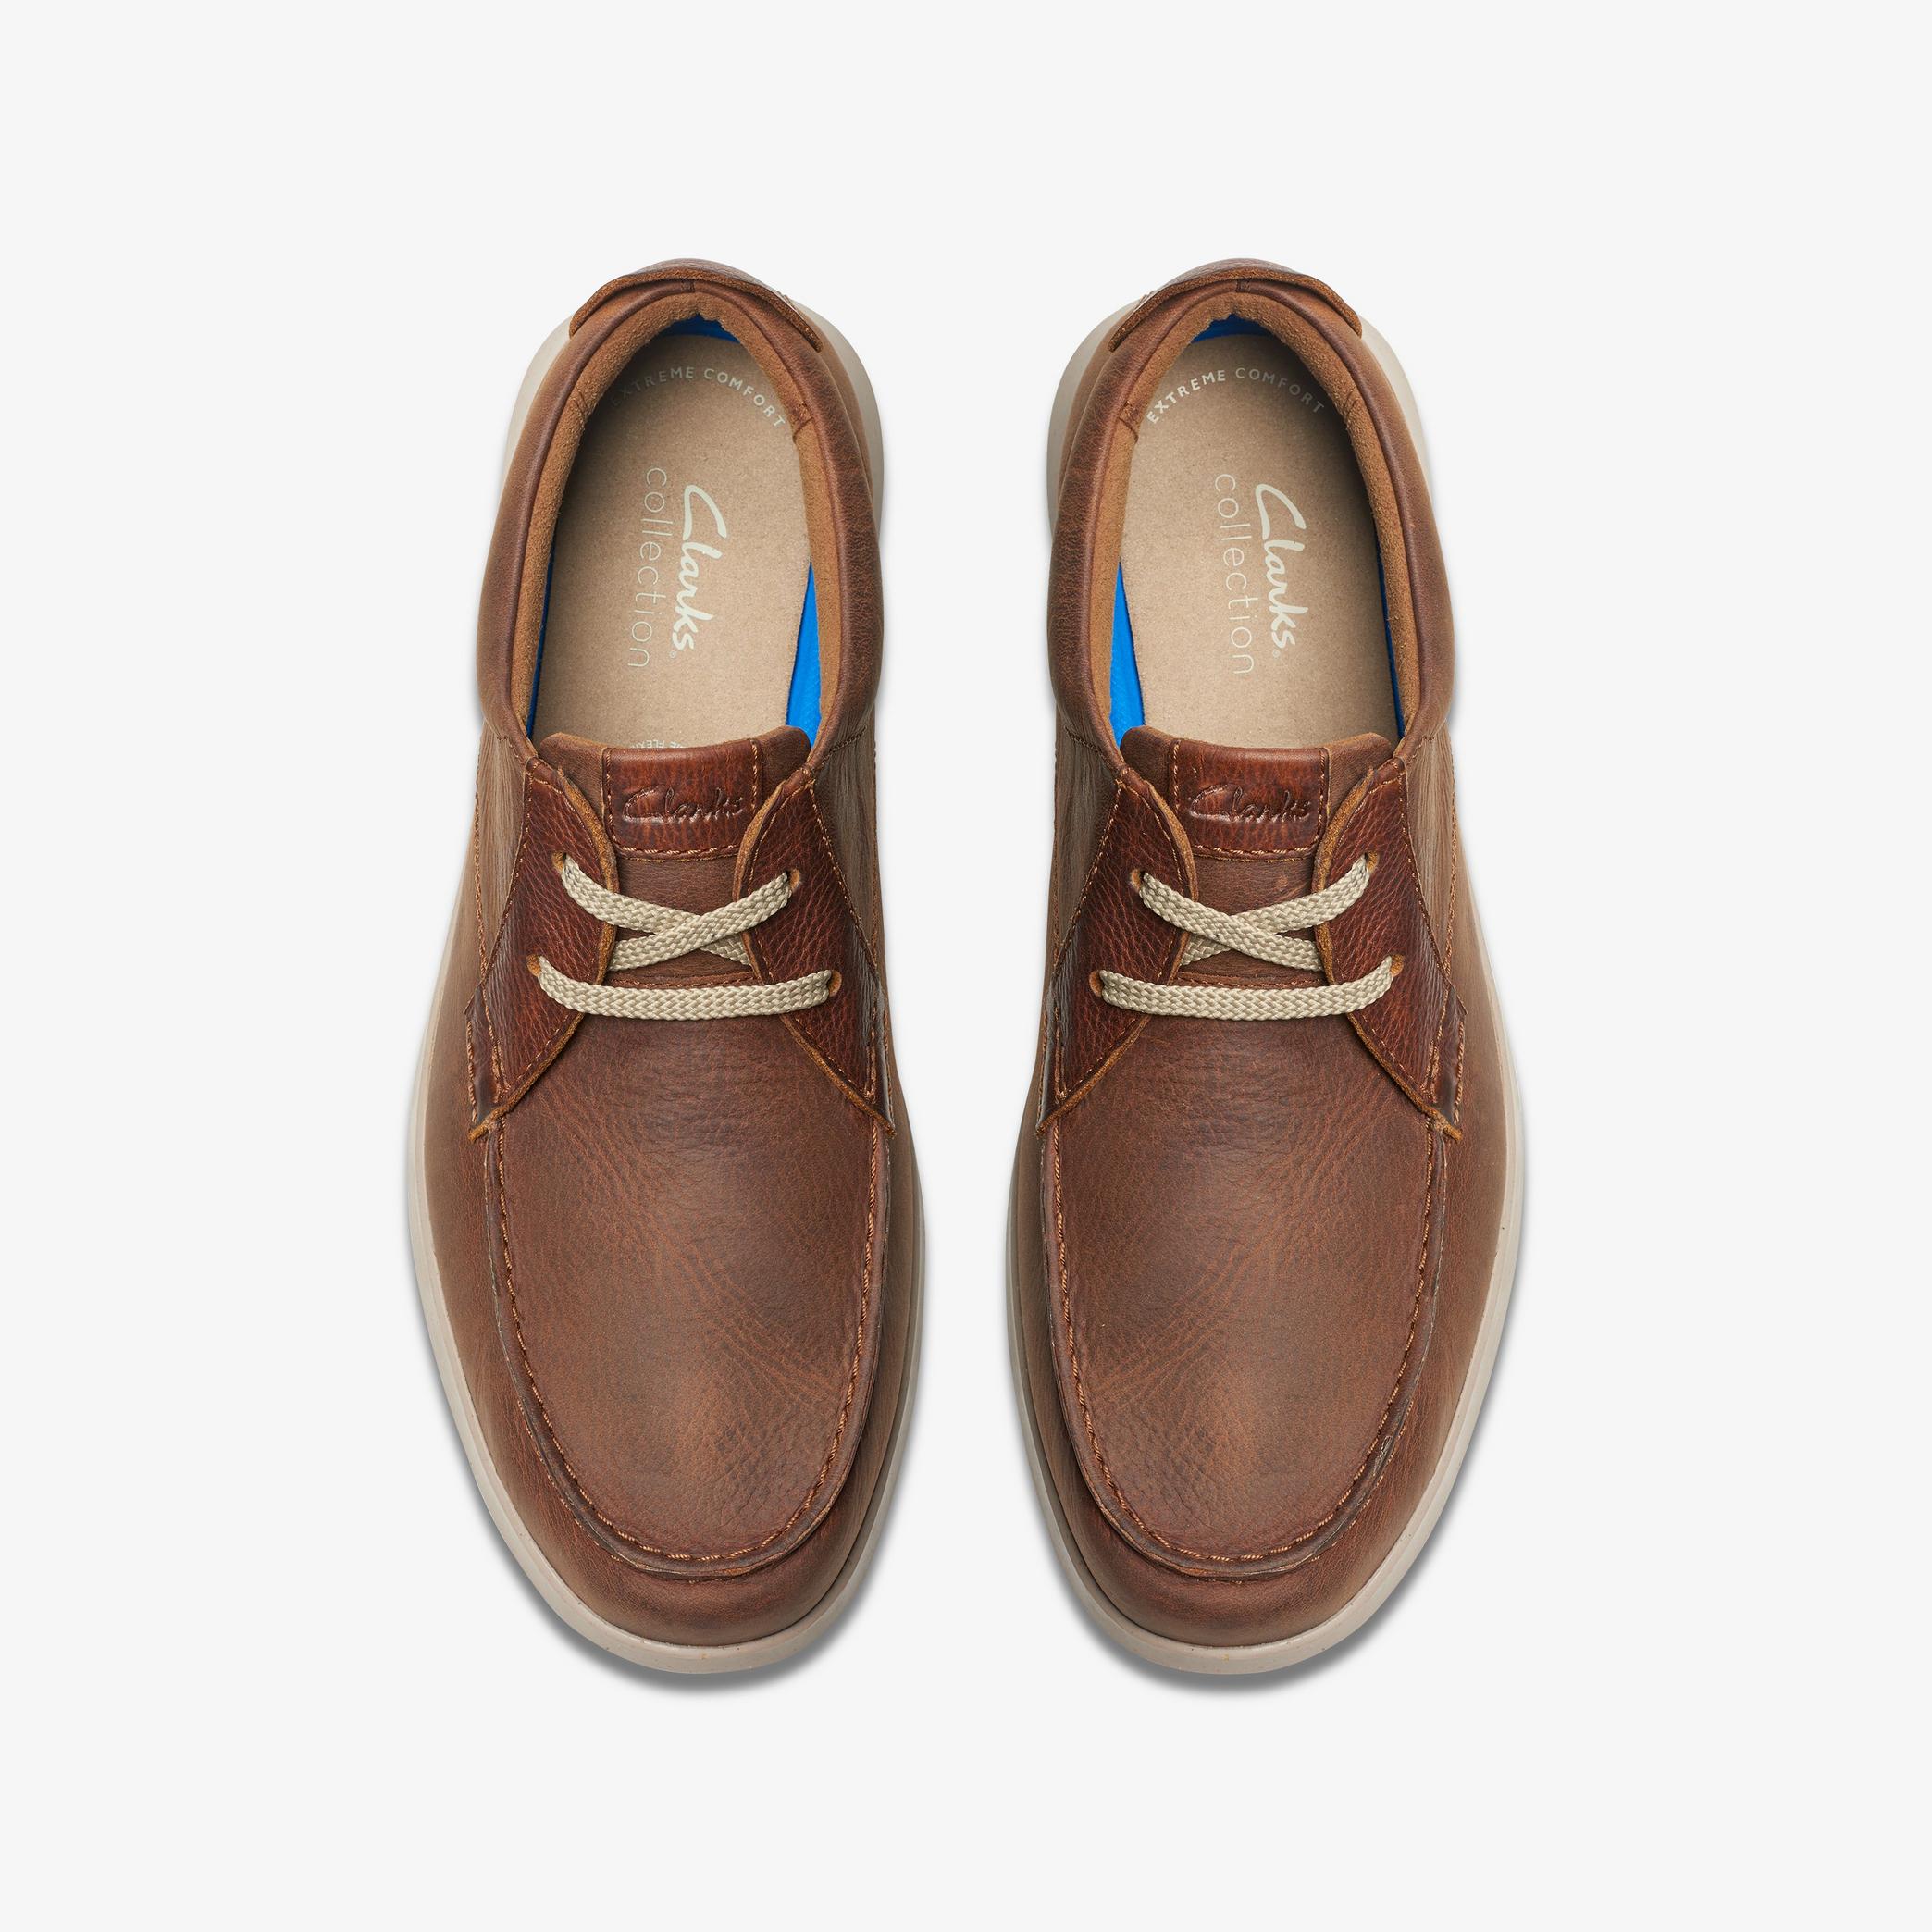 MENS Flexway Lace Dark Tan Leather Boat Shoes | Clarks US